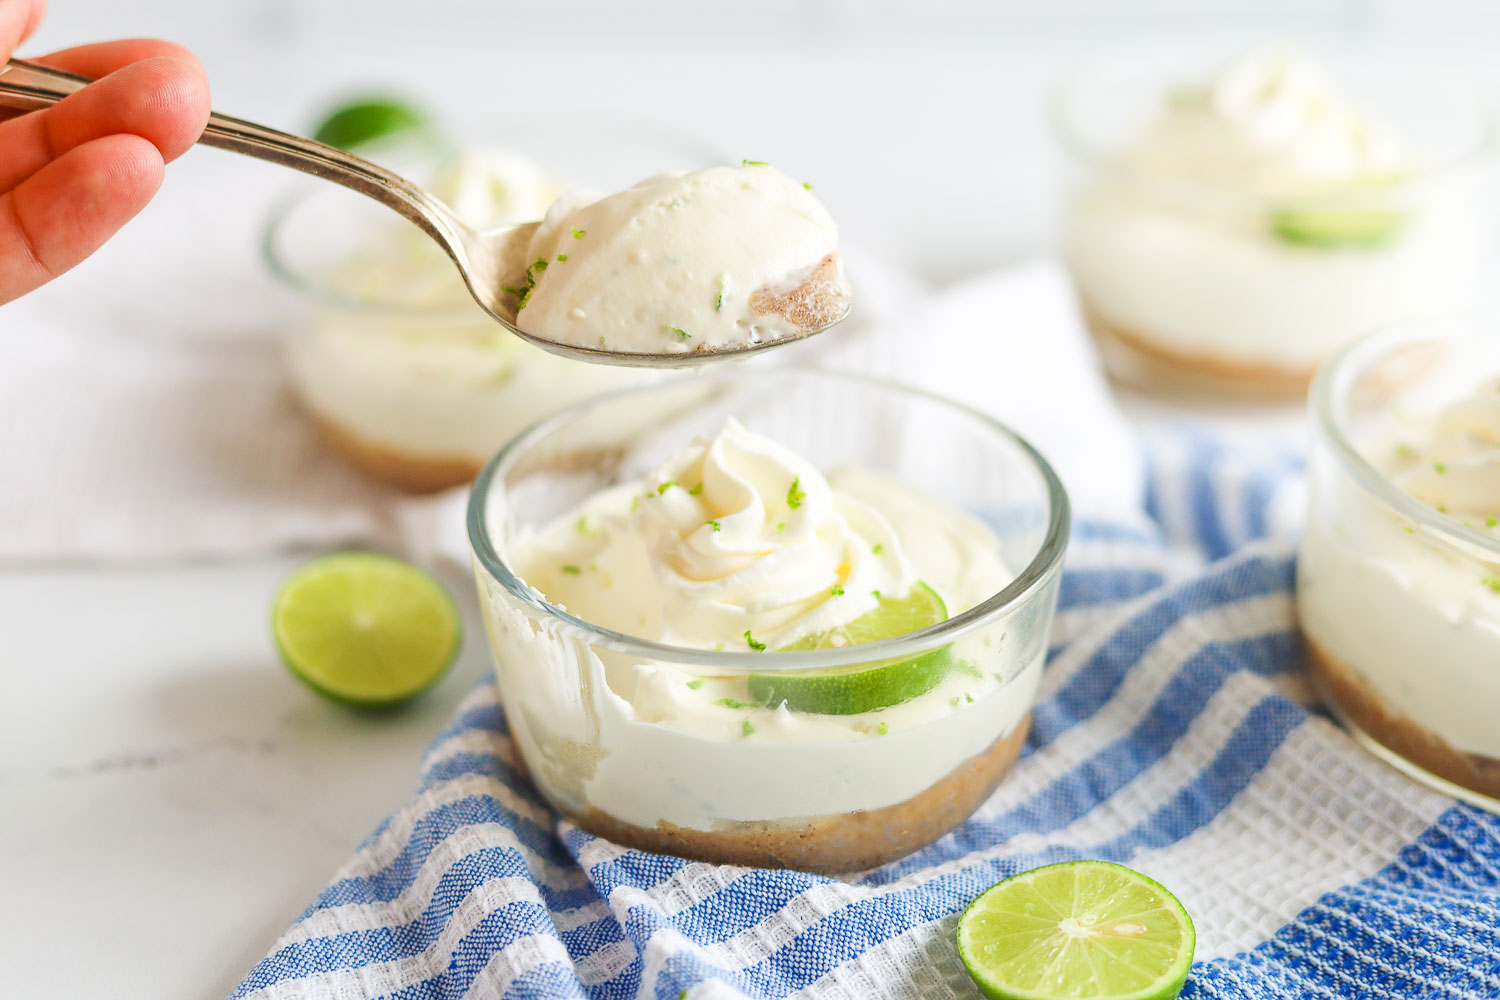 taking a bite out of no bake key lime cheesecake